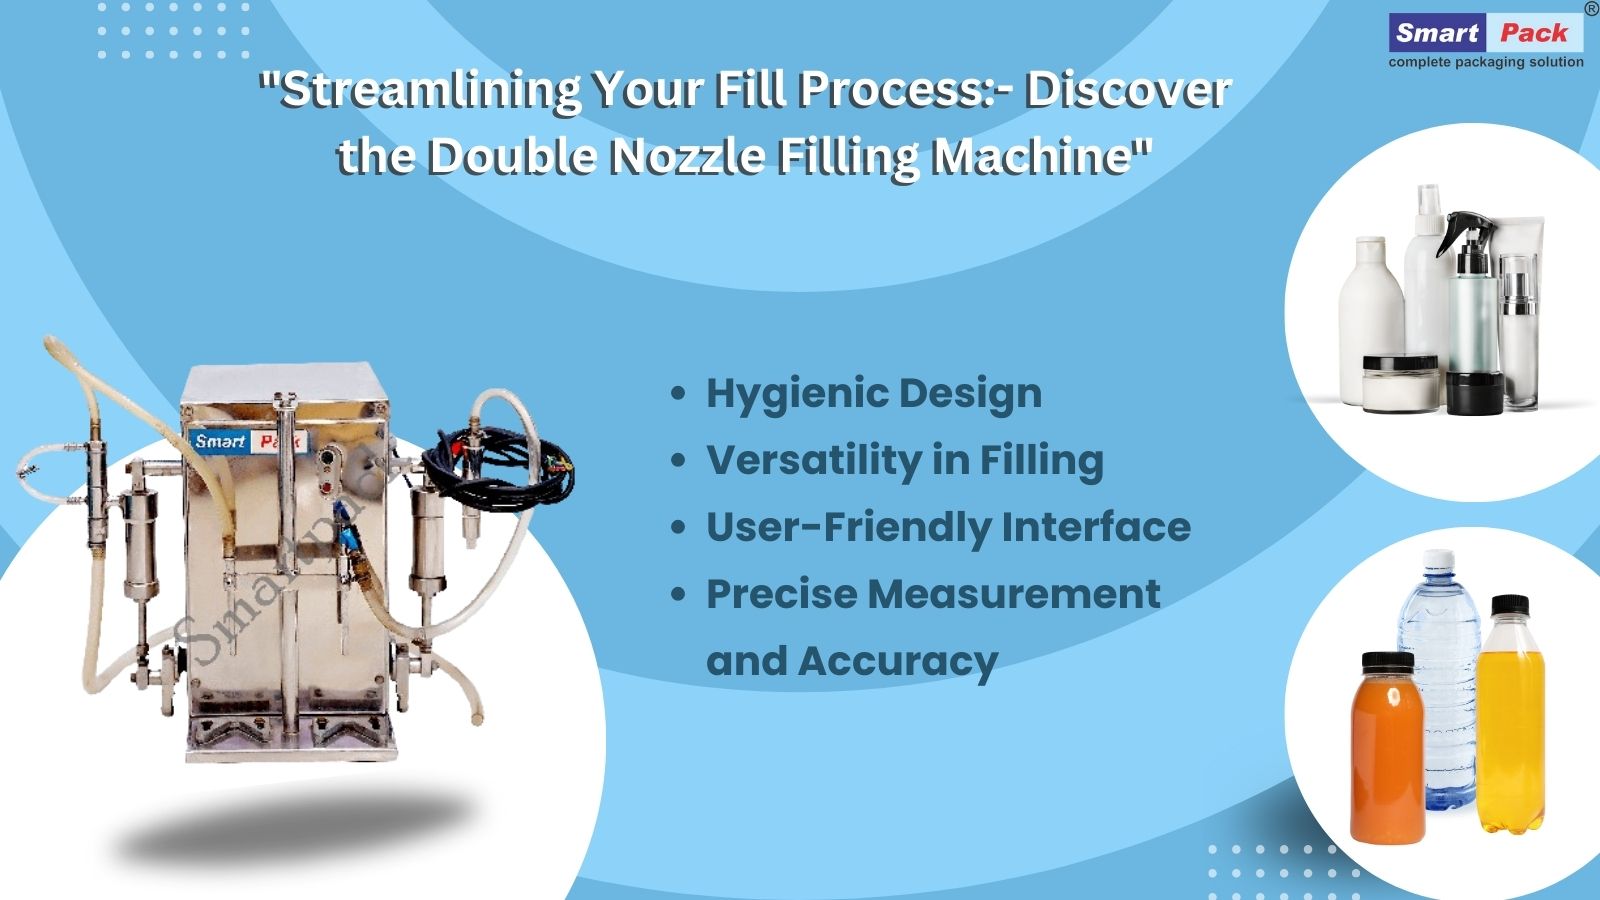 “Streamlining Your Fill Process: Discover the Double Nozzle Filling Machine”